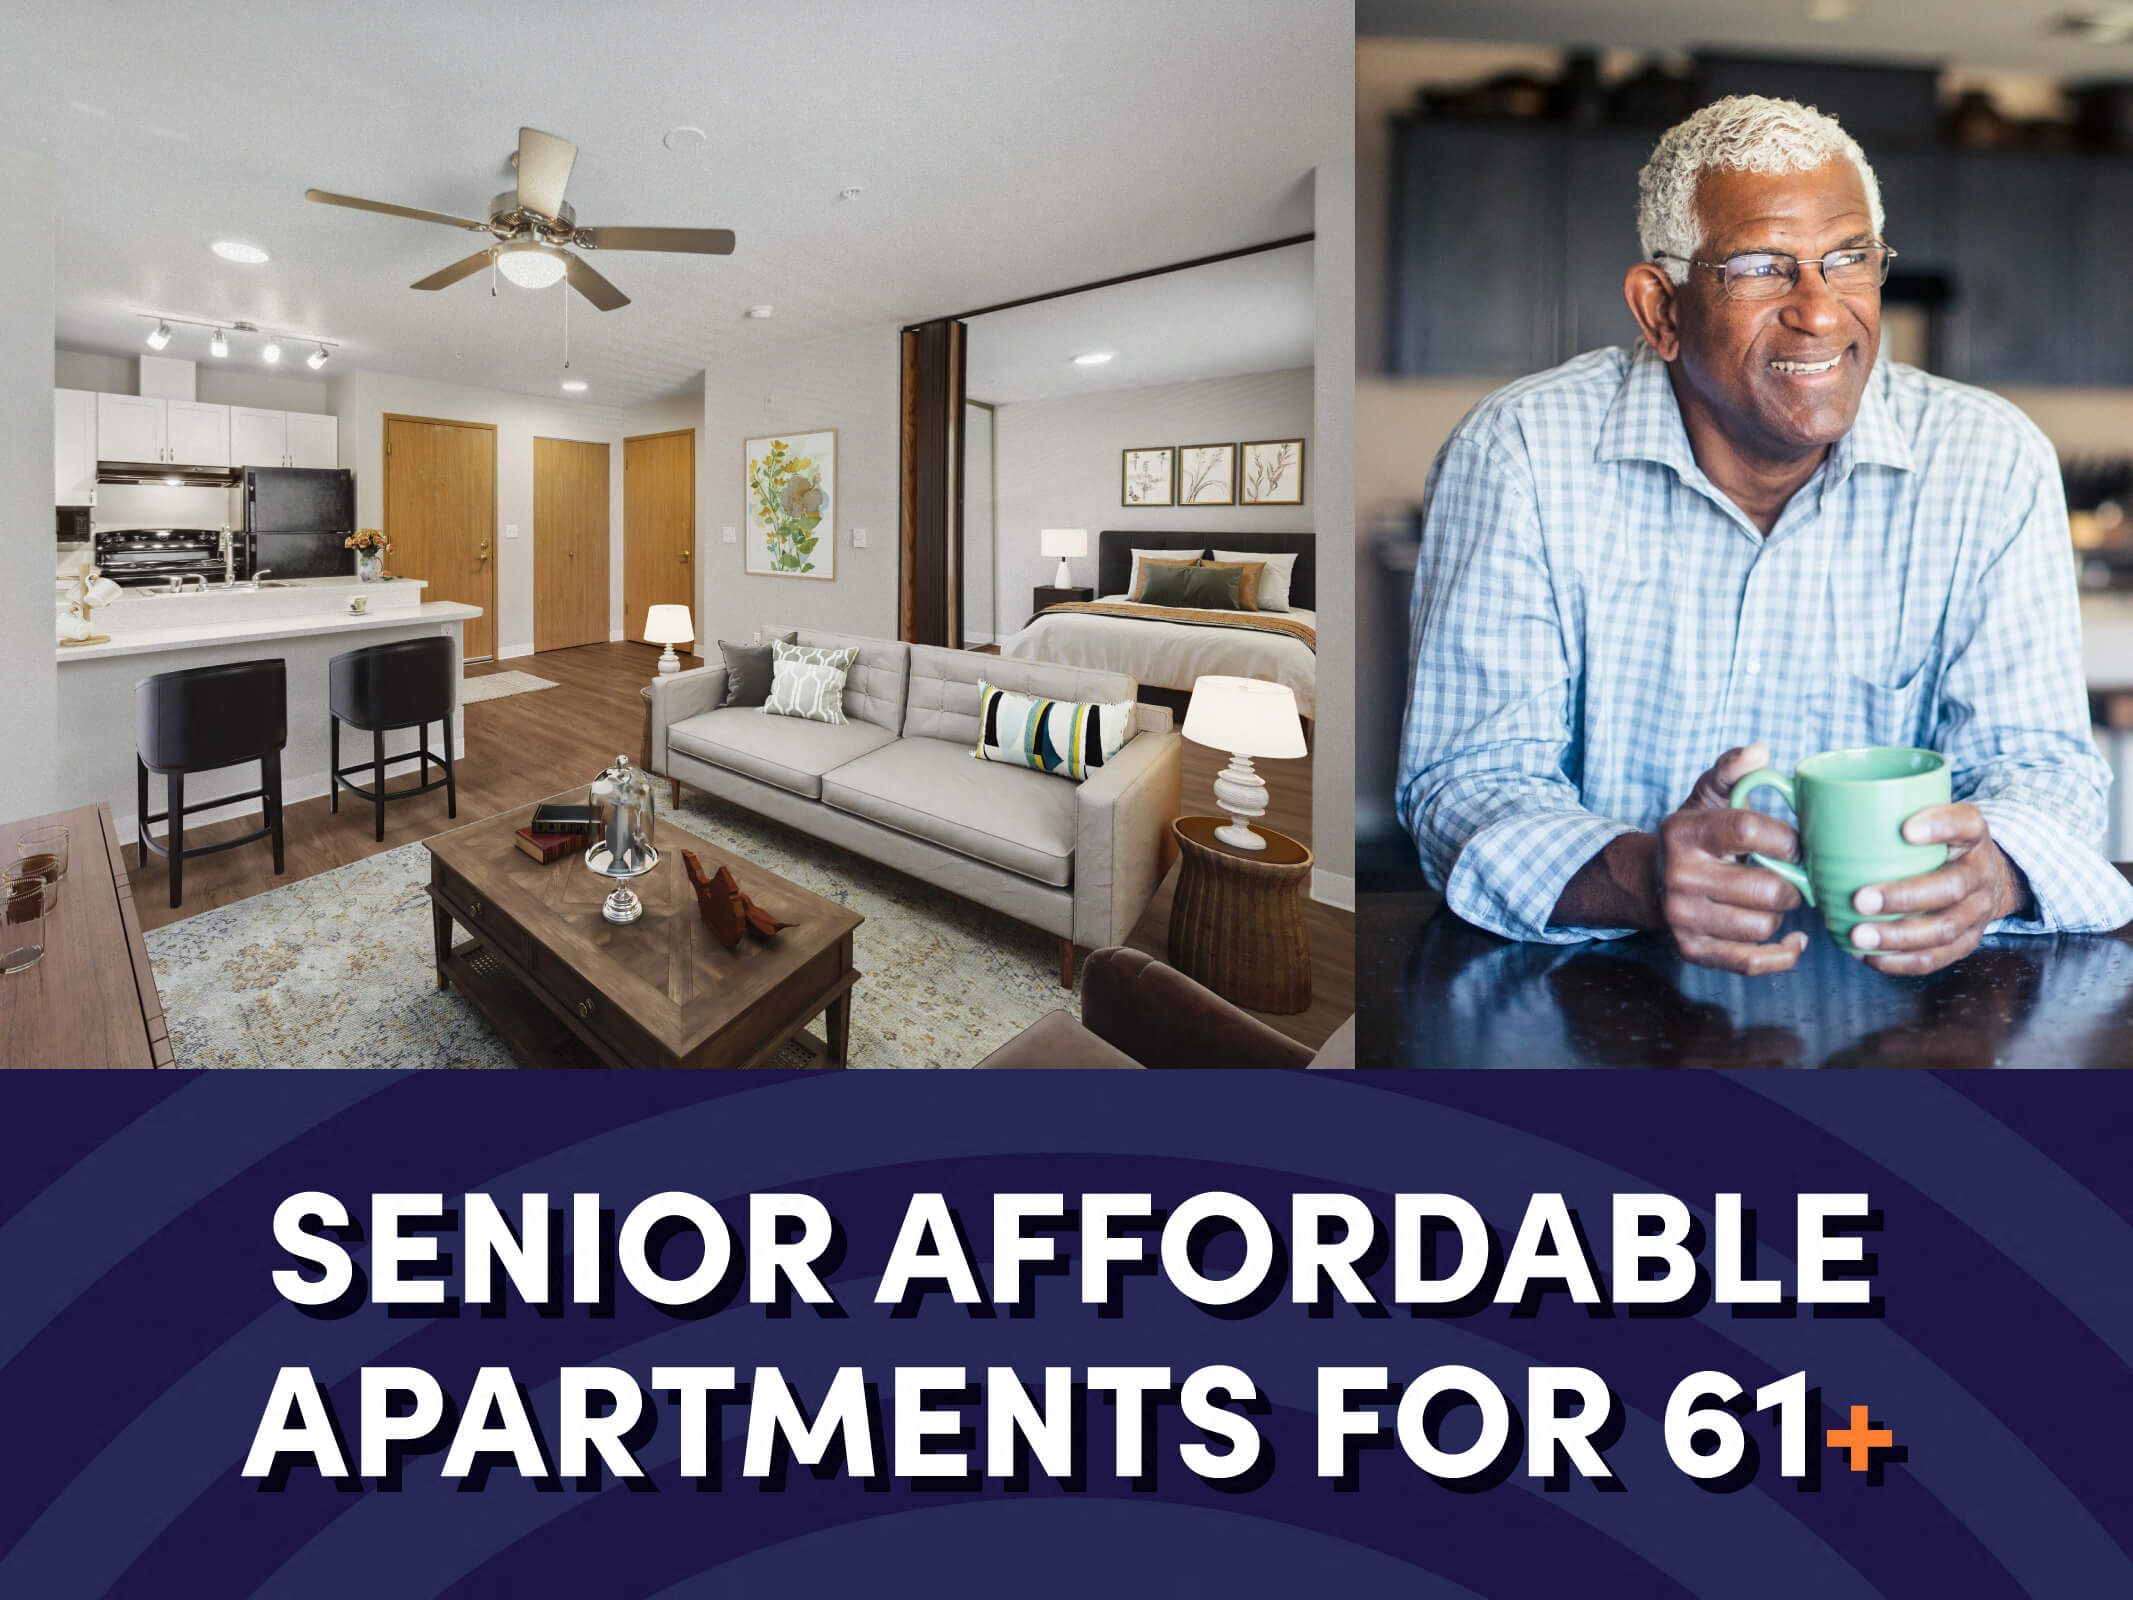 An image of a living room next to an image of a senior man holding a mug above text reading “Senior Affordable Apartments for 61+” for the Auburn Court Senior Affordable Apartments in Edmonds, Washington.